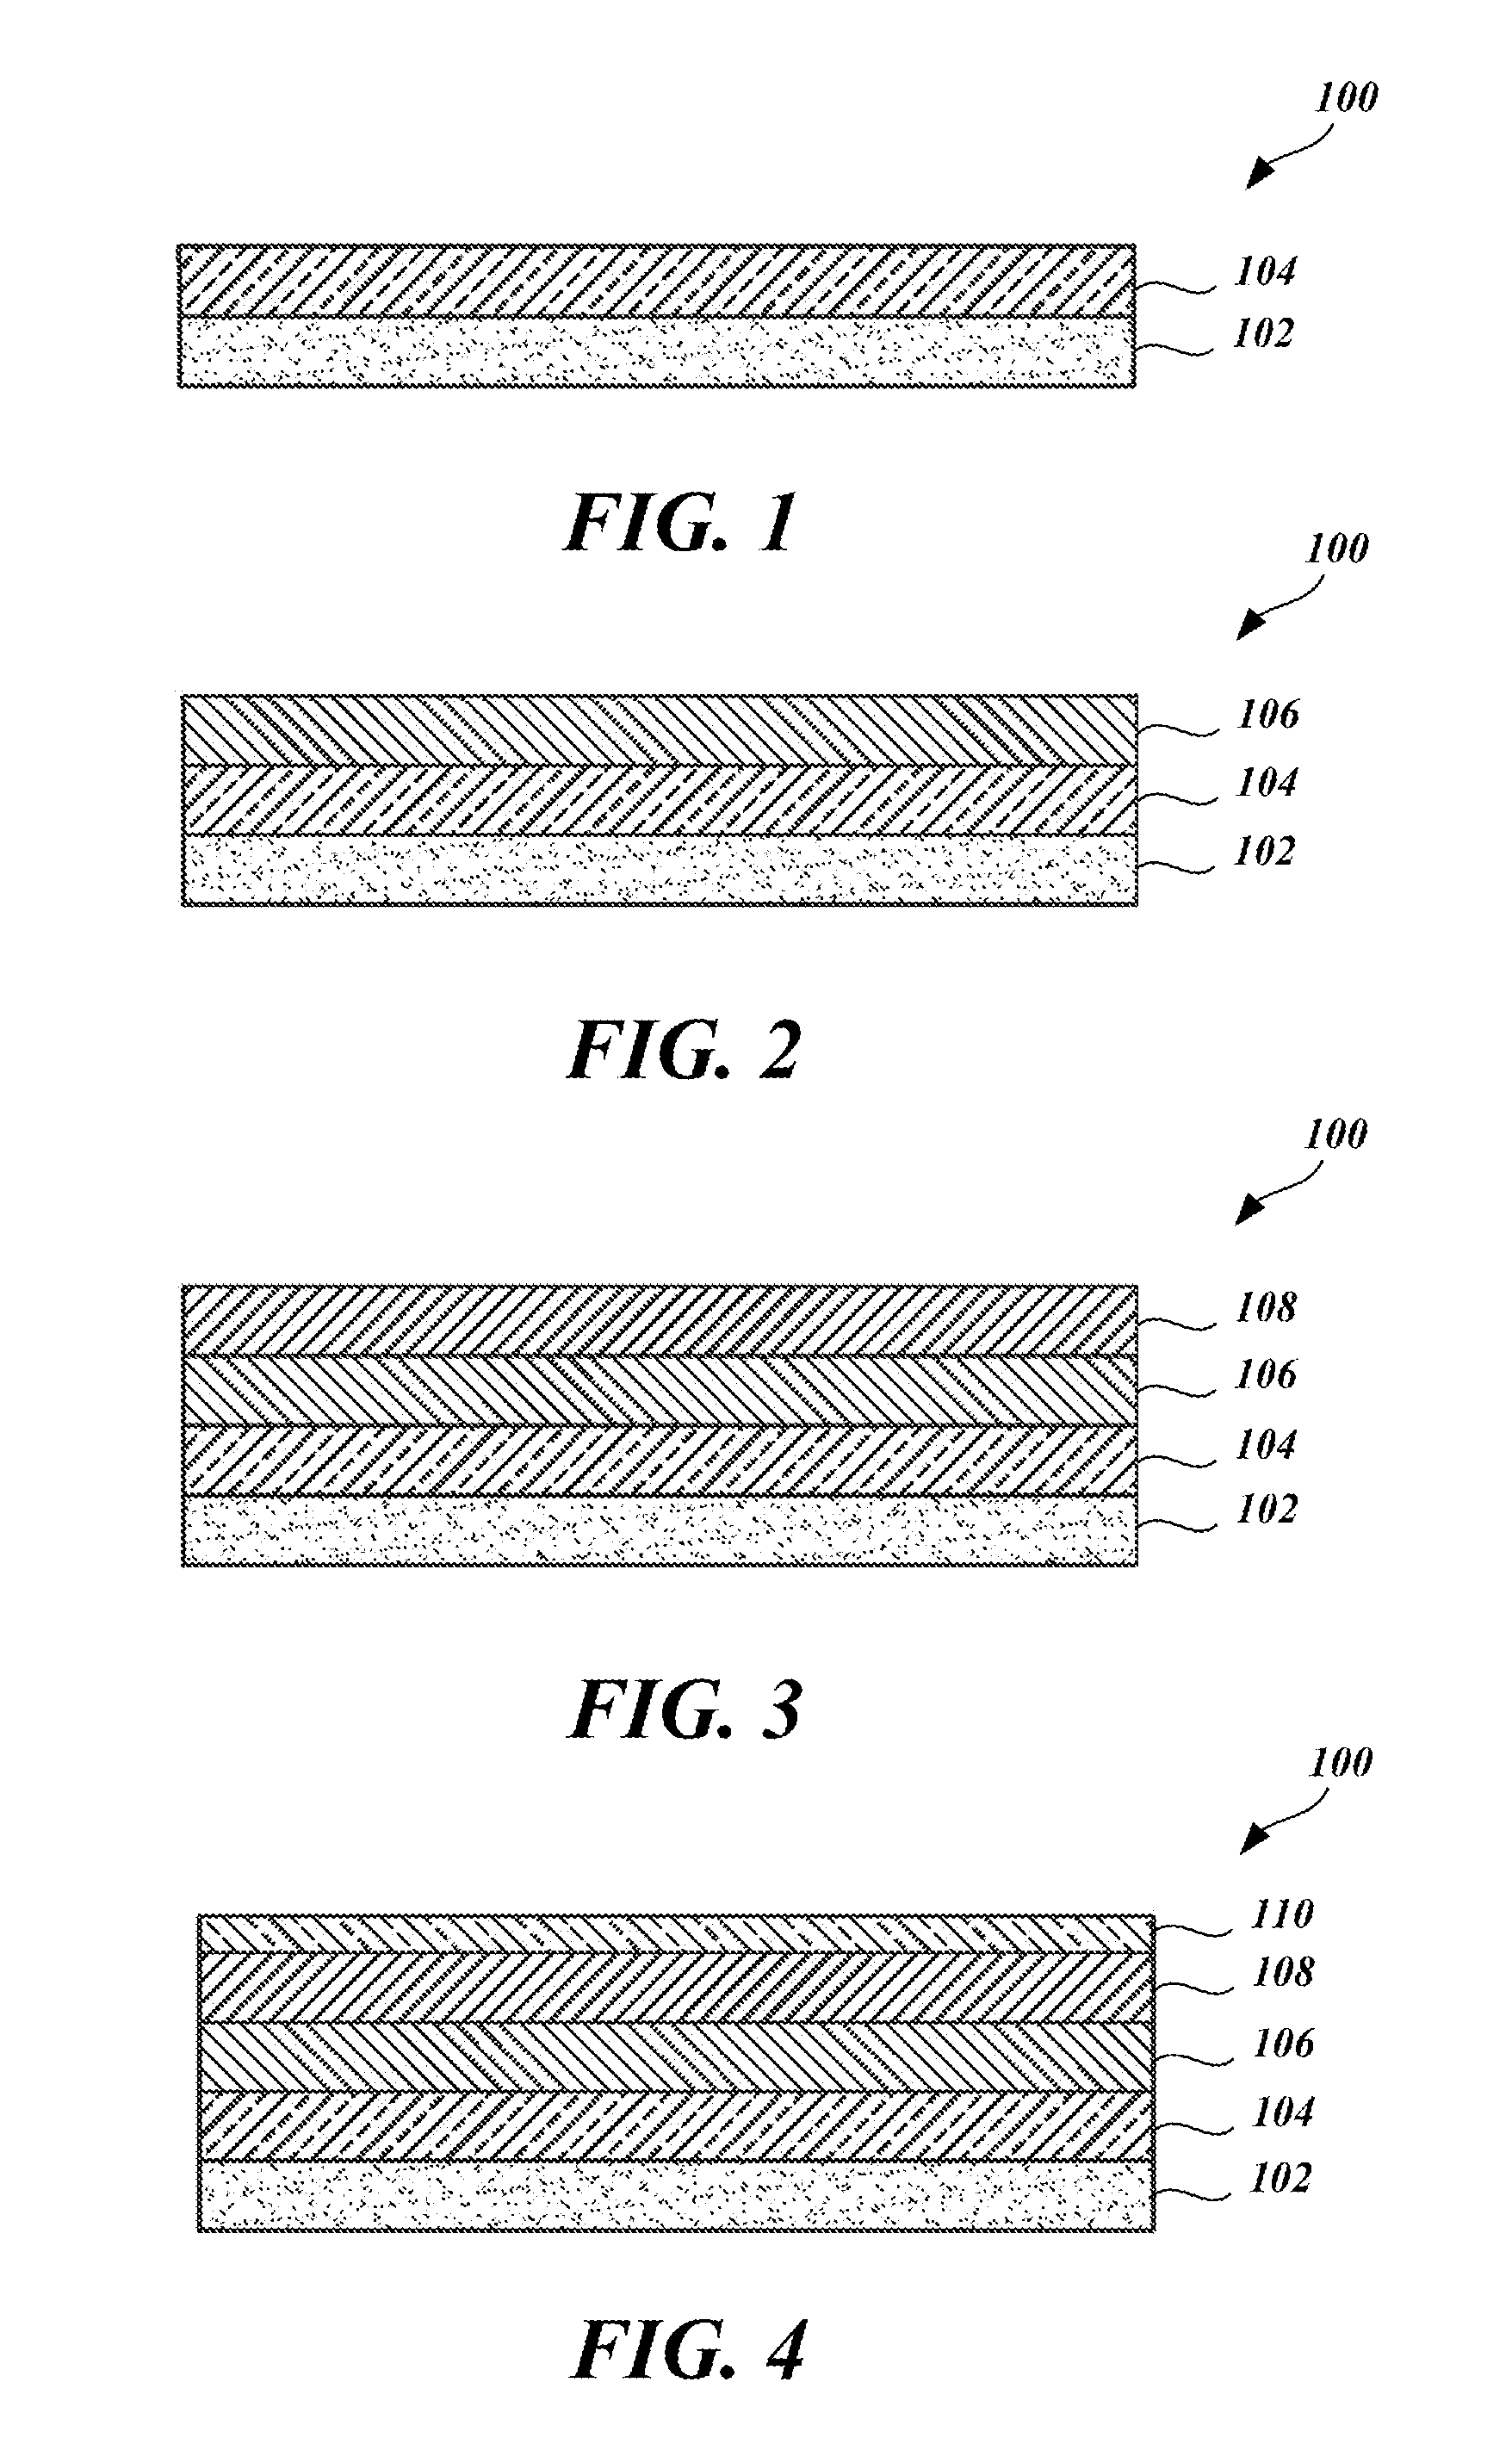 Systems and methods for fabrication of superconducting circuits